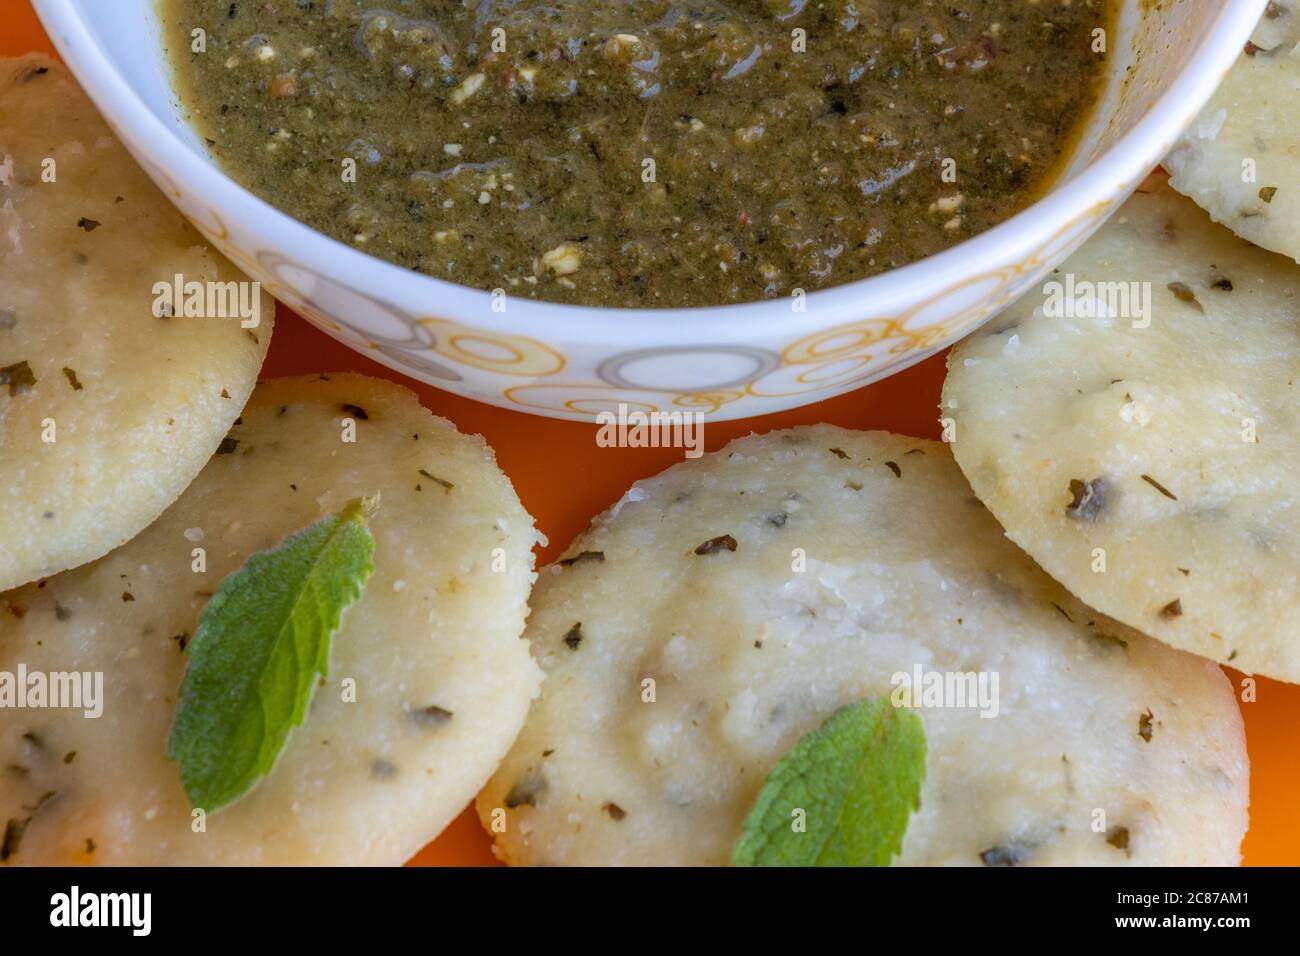 Idli with green chutney, close up view, a famous south indian recipe Stock Photo